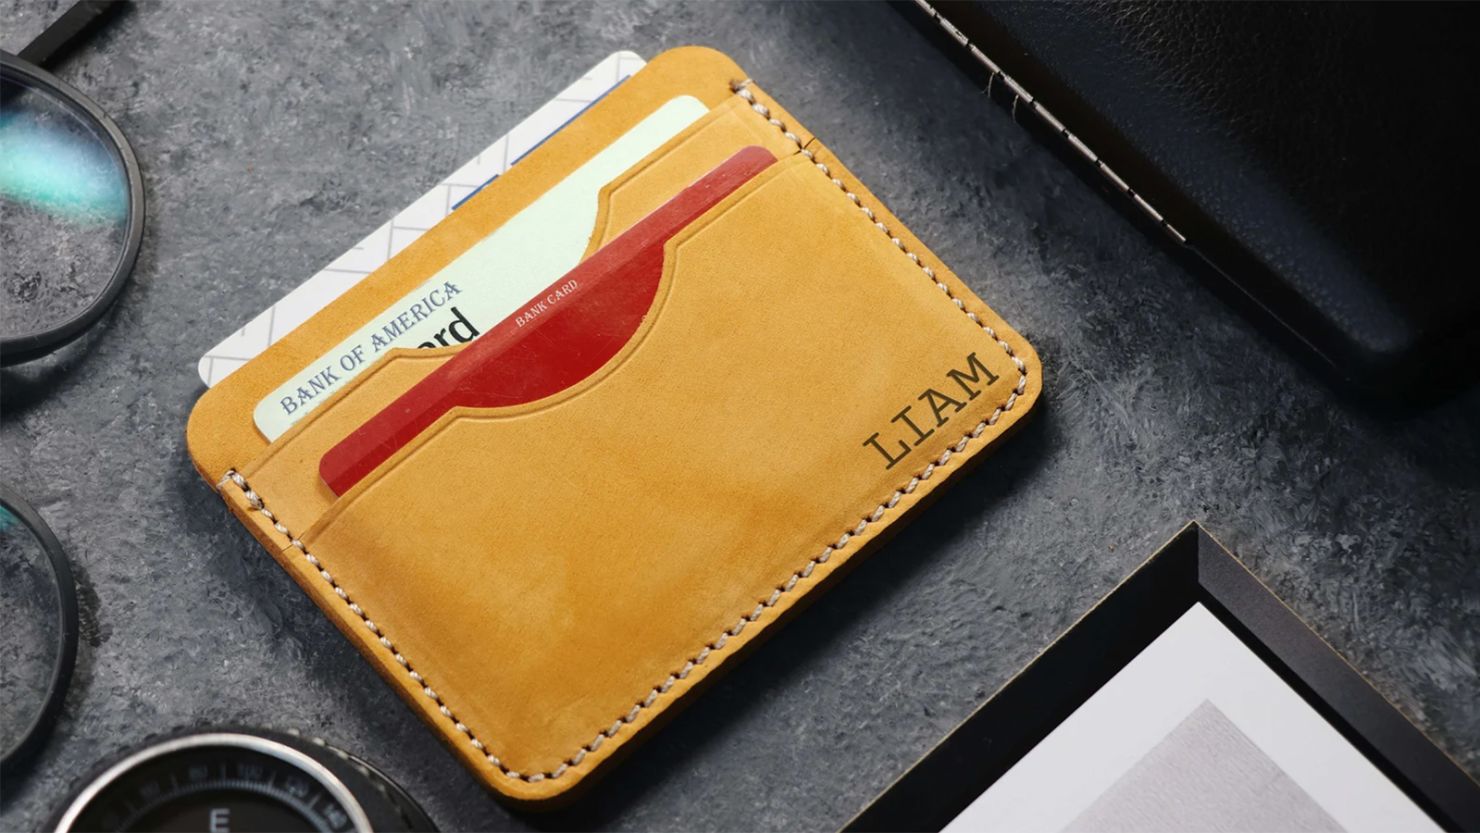 https://media.cnn.com/api/v1/images/stellar/prod/gifts-people-you-don-t-know-southernkickleather-personalized-leather-card-holder.jpg?c=16x9&q=h_833,w_1480,c_fill